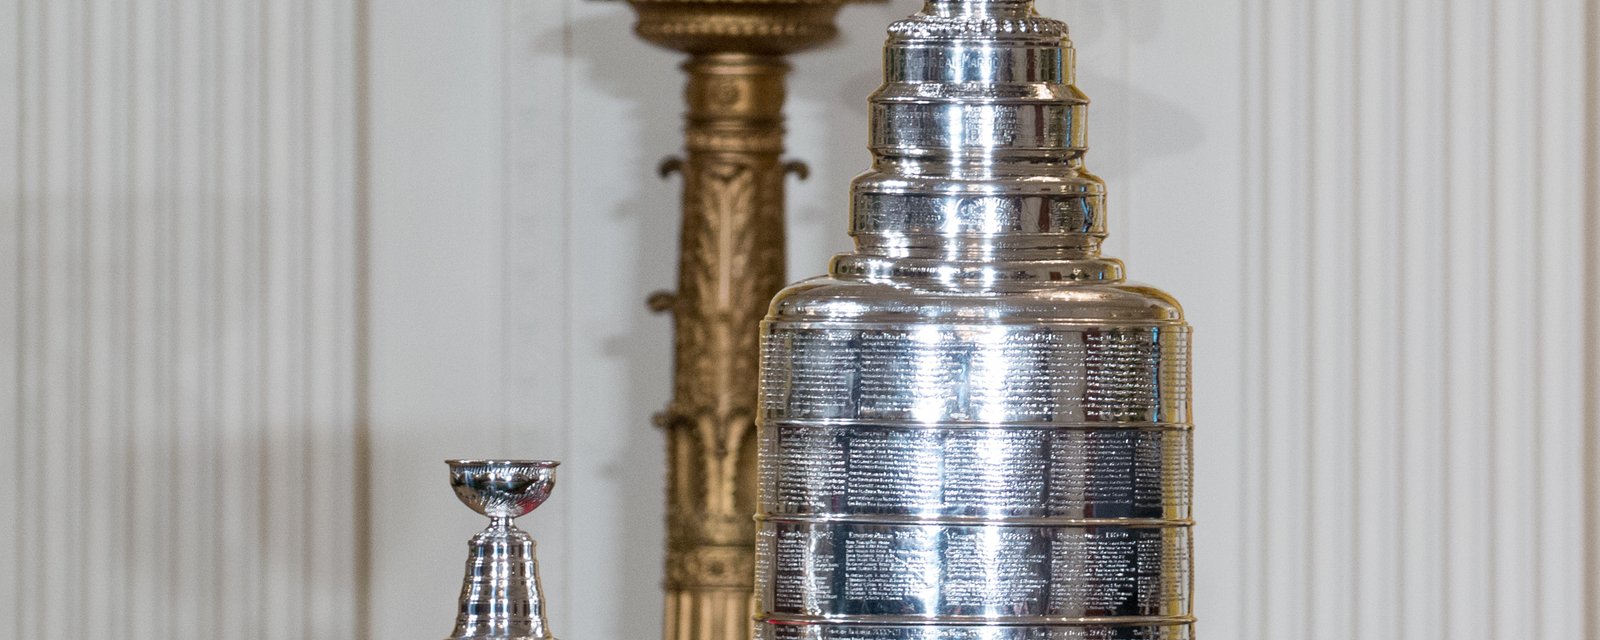 News outlet makes an incredibly bold call for the Stanley Cup Finals